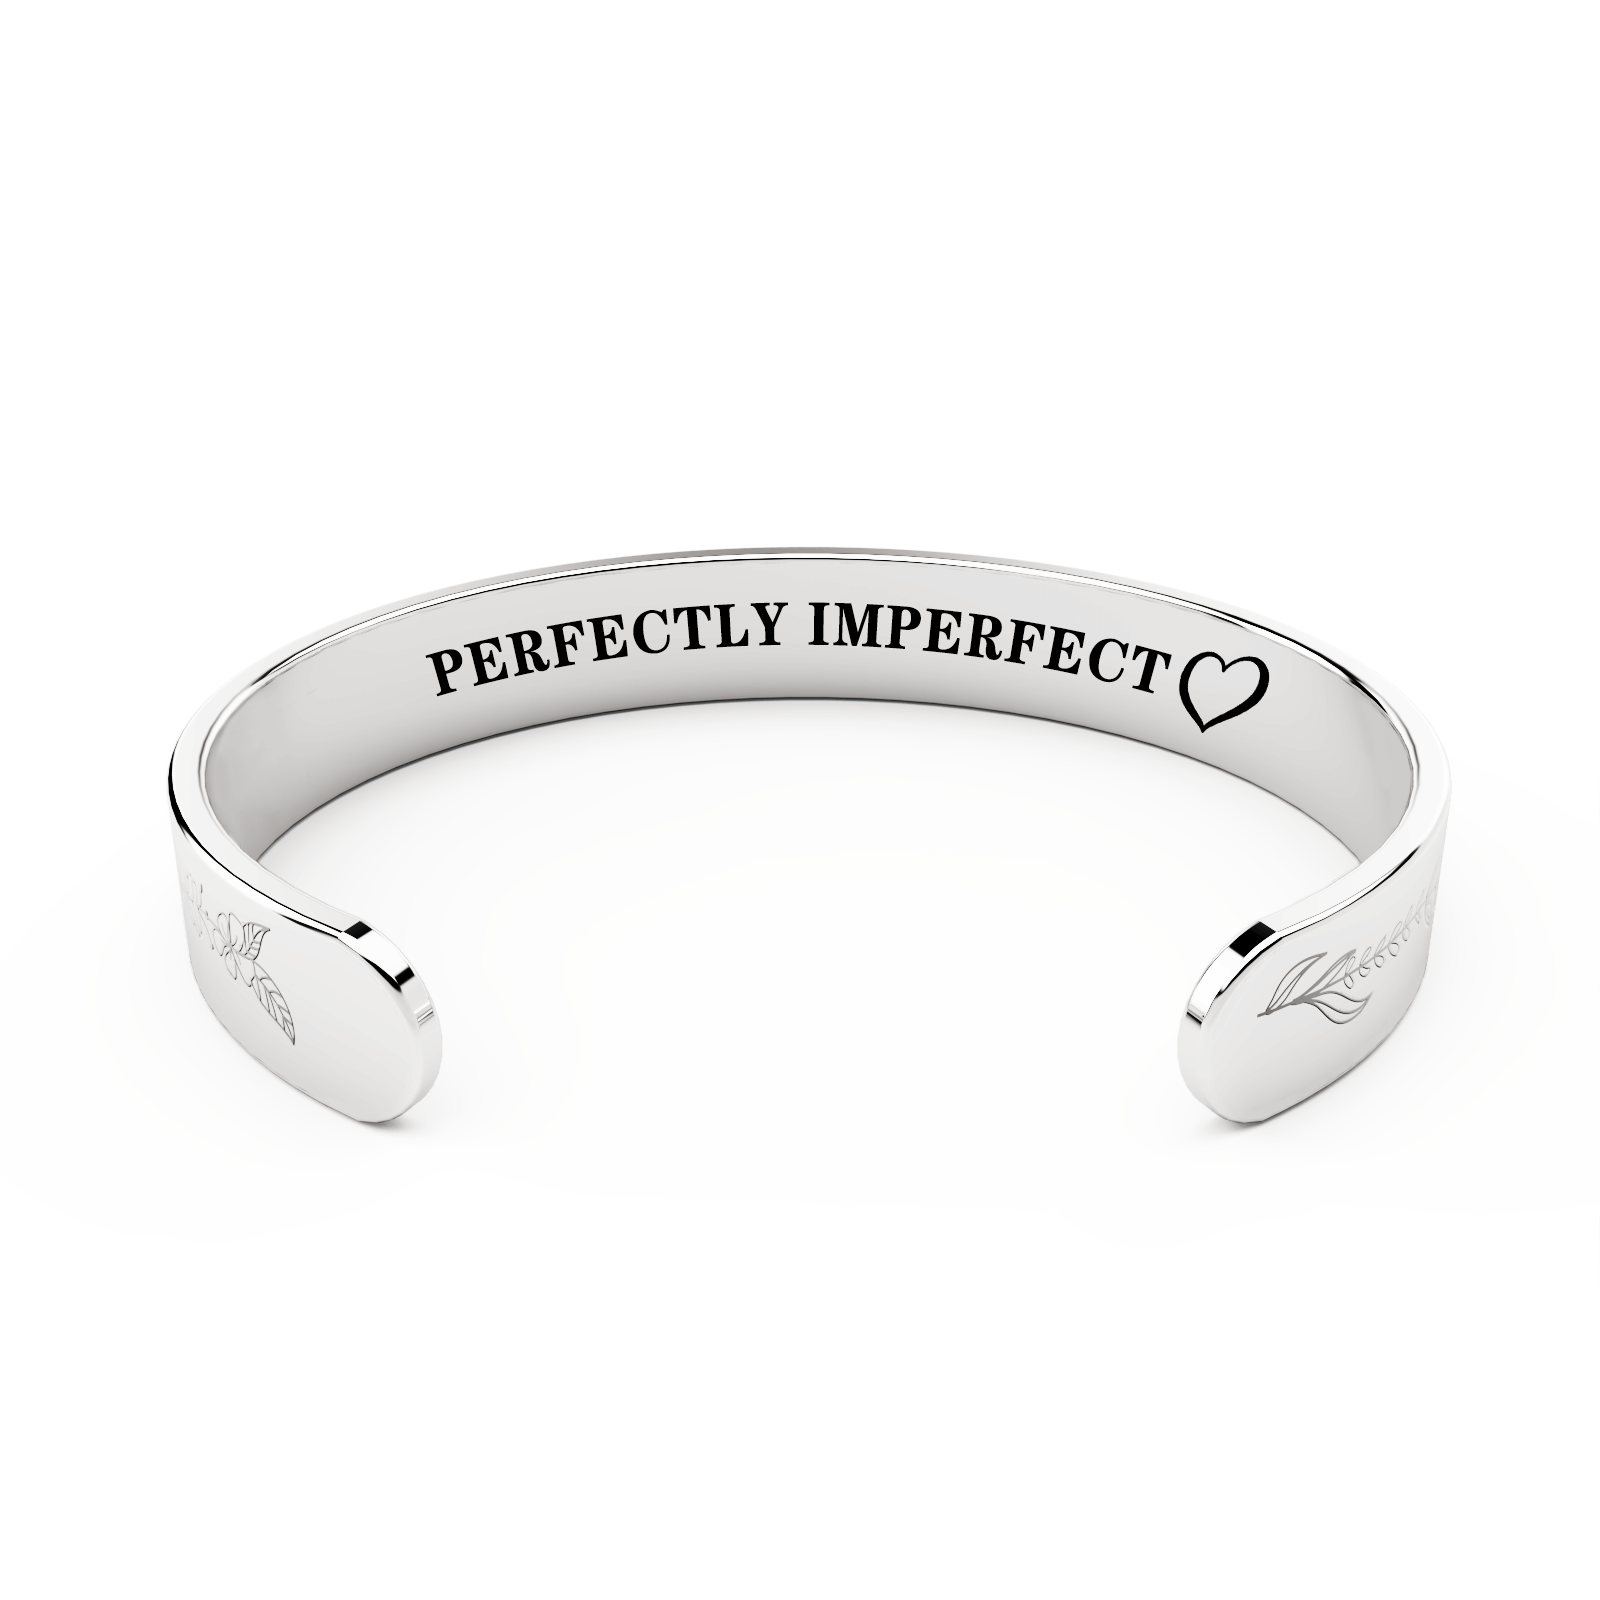 "Perfectly Imperfect" Silver-plated Bracelet